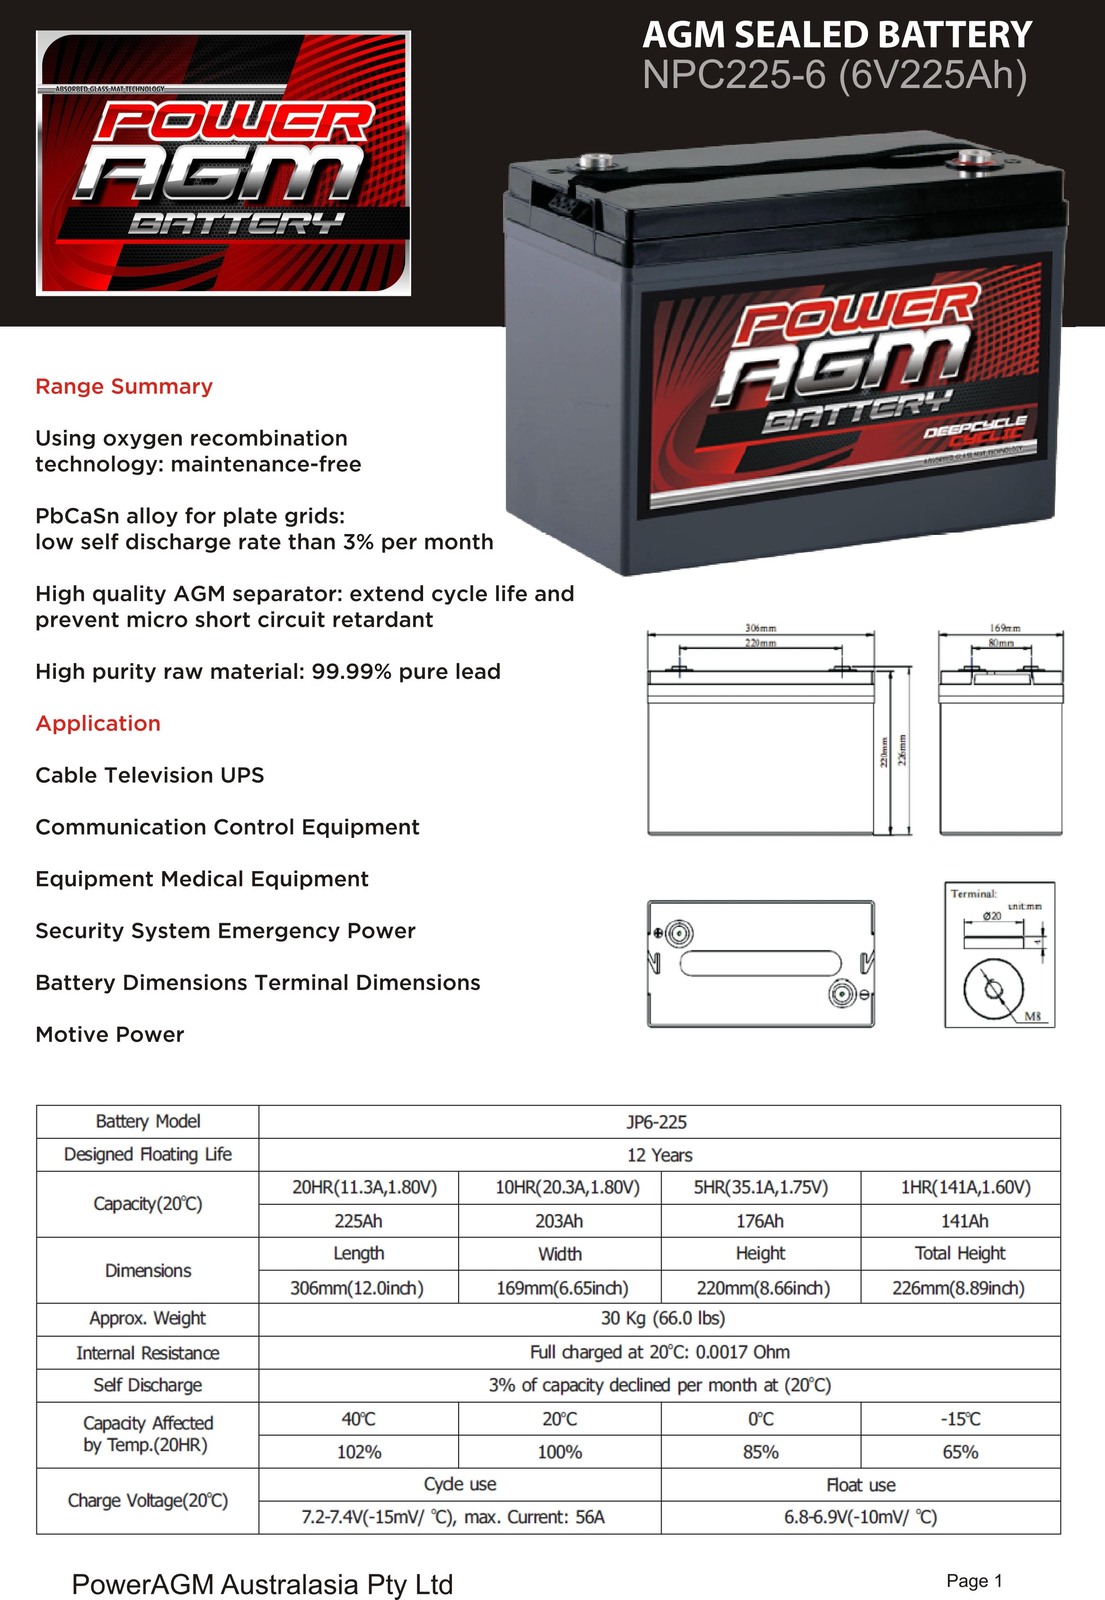 225AH AGM 6V Deep Cycle Battery for Solar systems, offgrid, 4WD, 4X4, Camping, Caravan, Emergency Power, Security